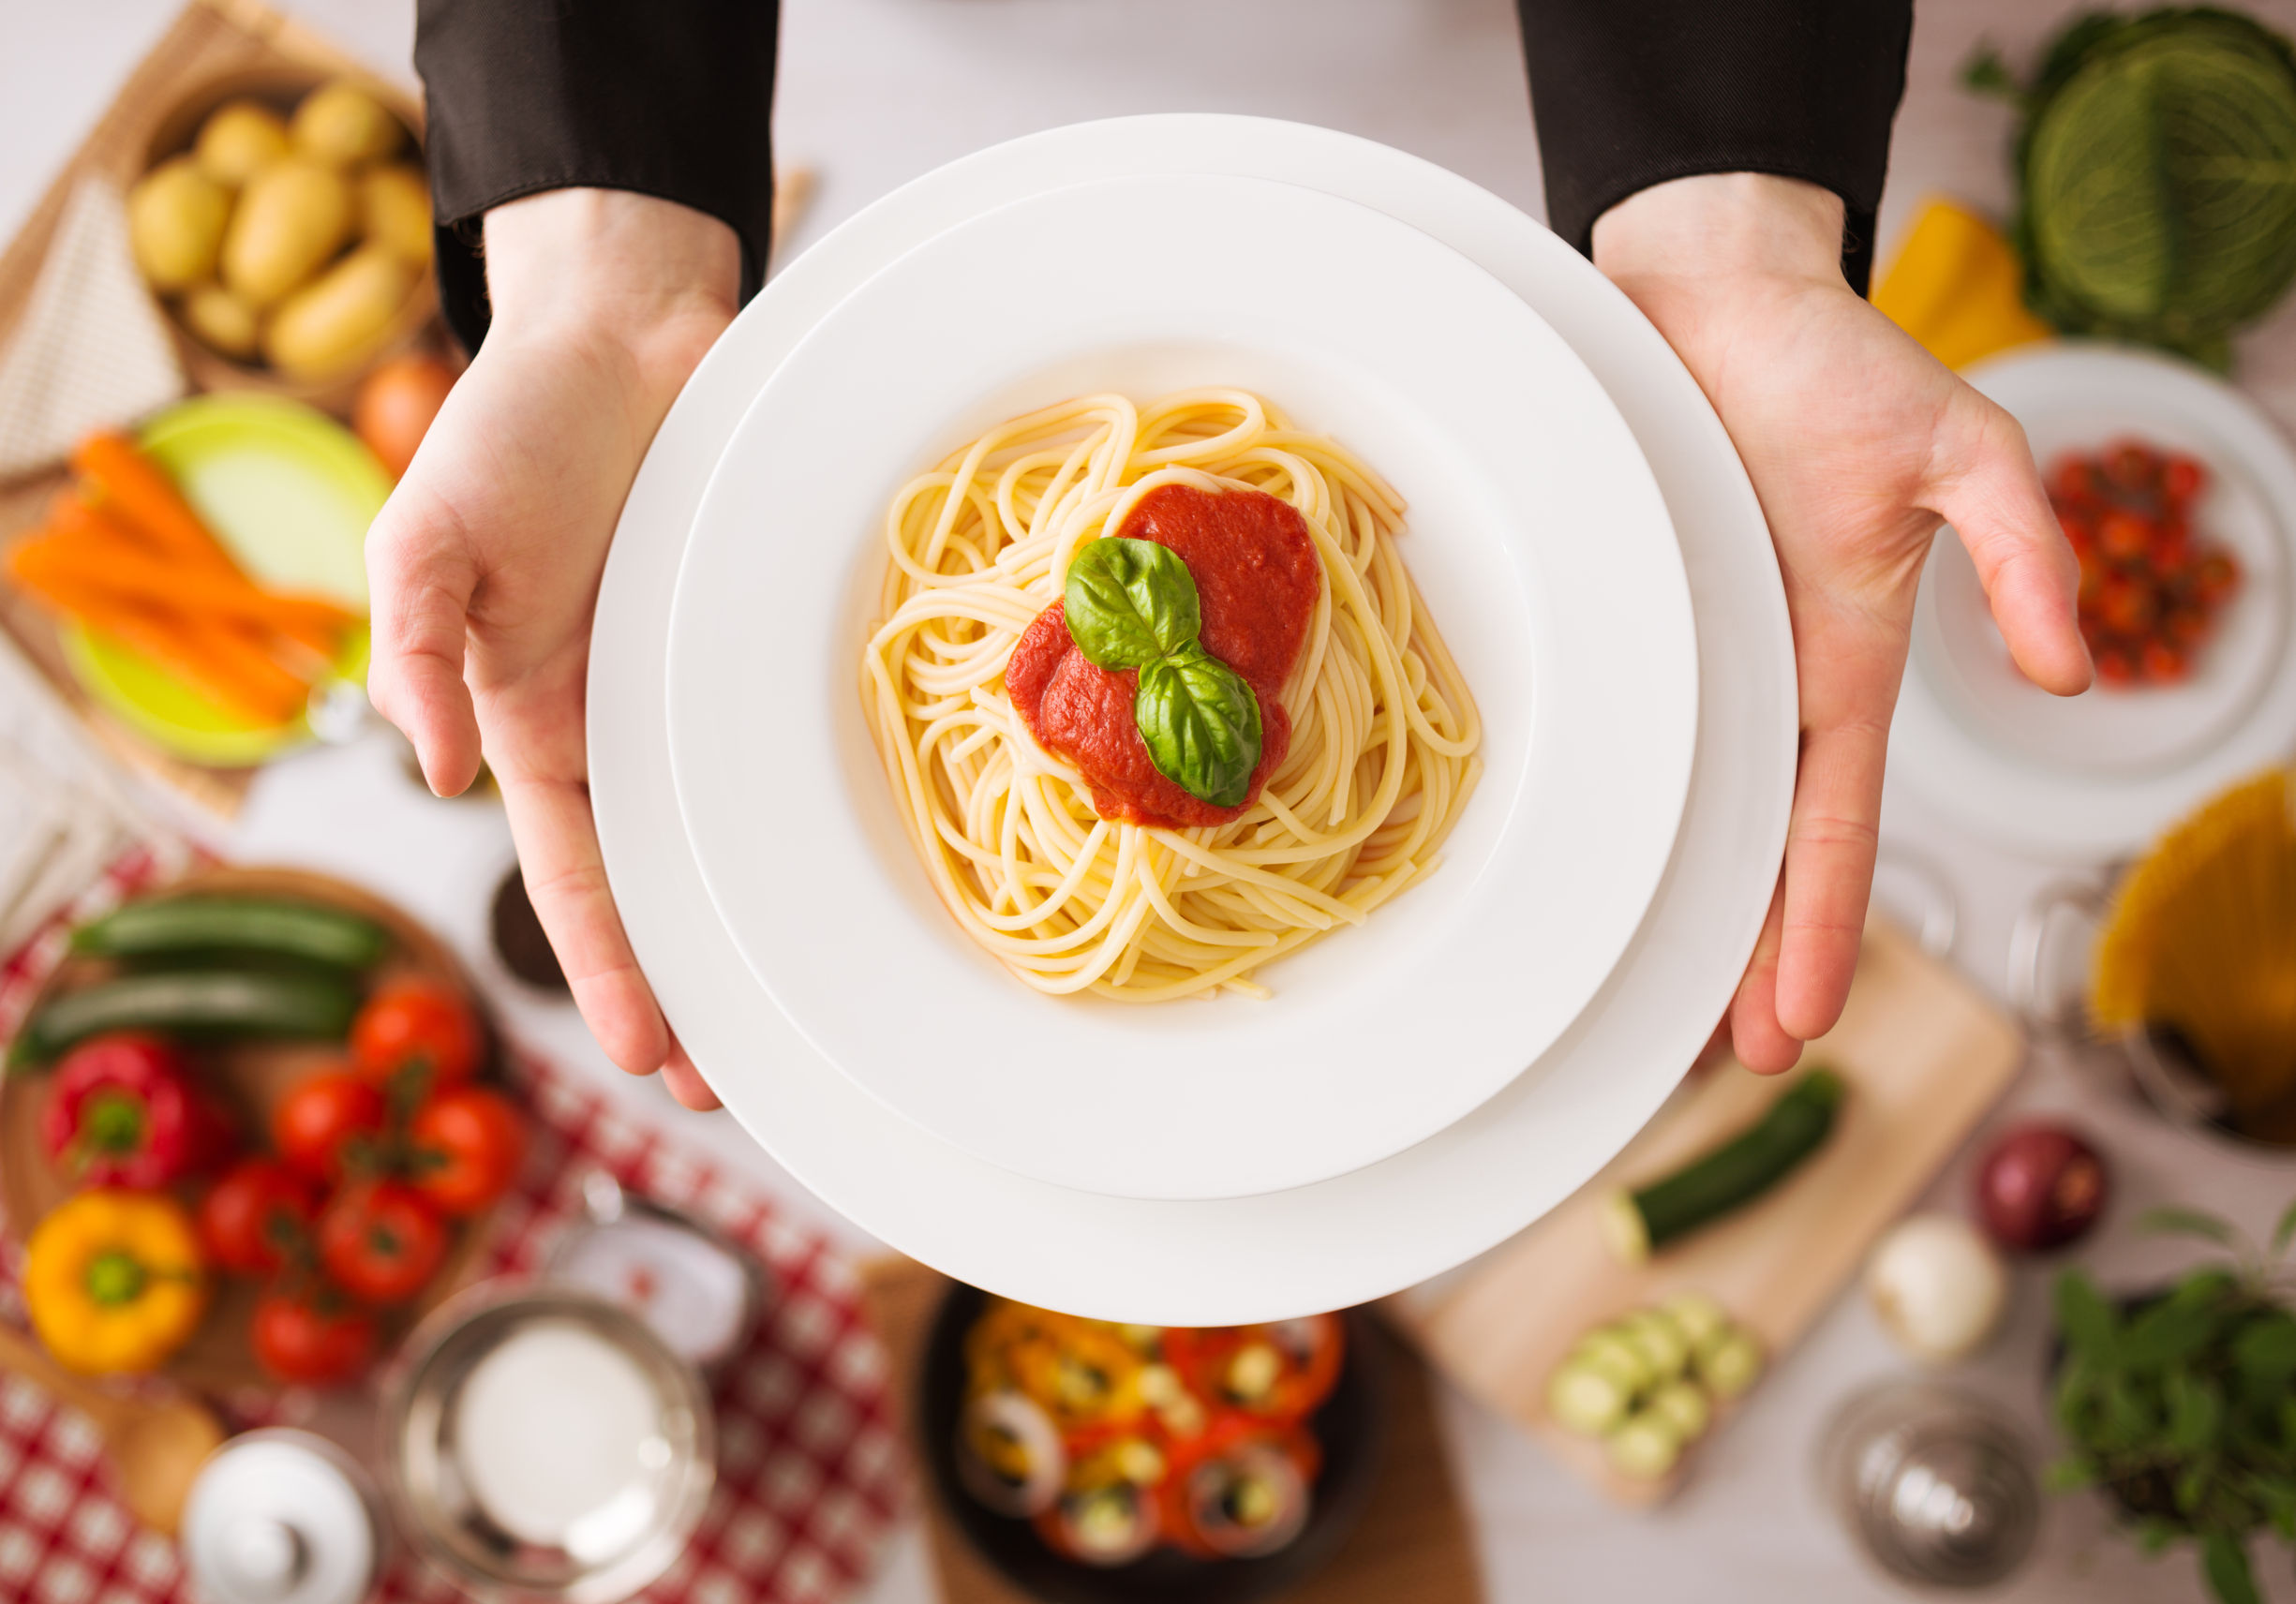 39375627 - professional chef's hands cooking pasta on a wooden worktop with vegetables, food ingredients and utensils, top view